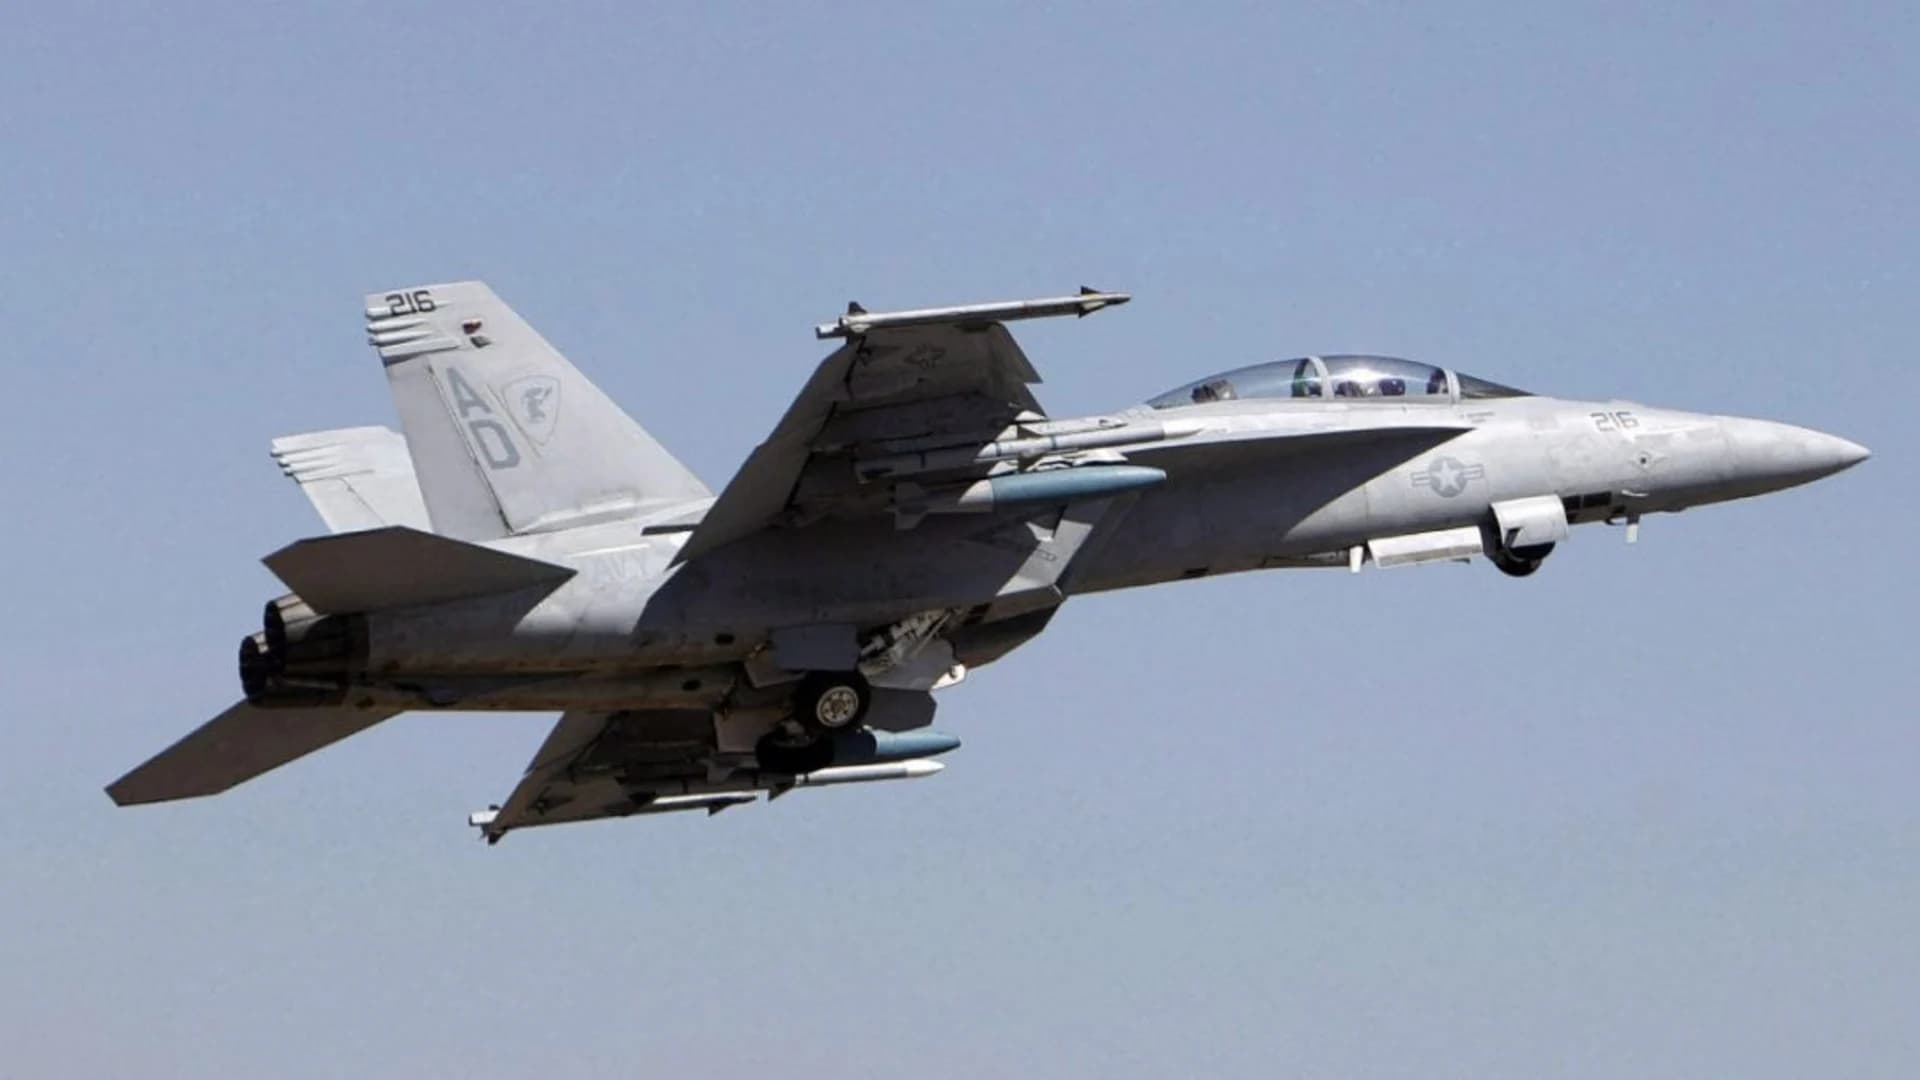 Navy jets to fly over Hudson River today